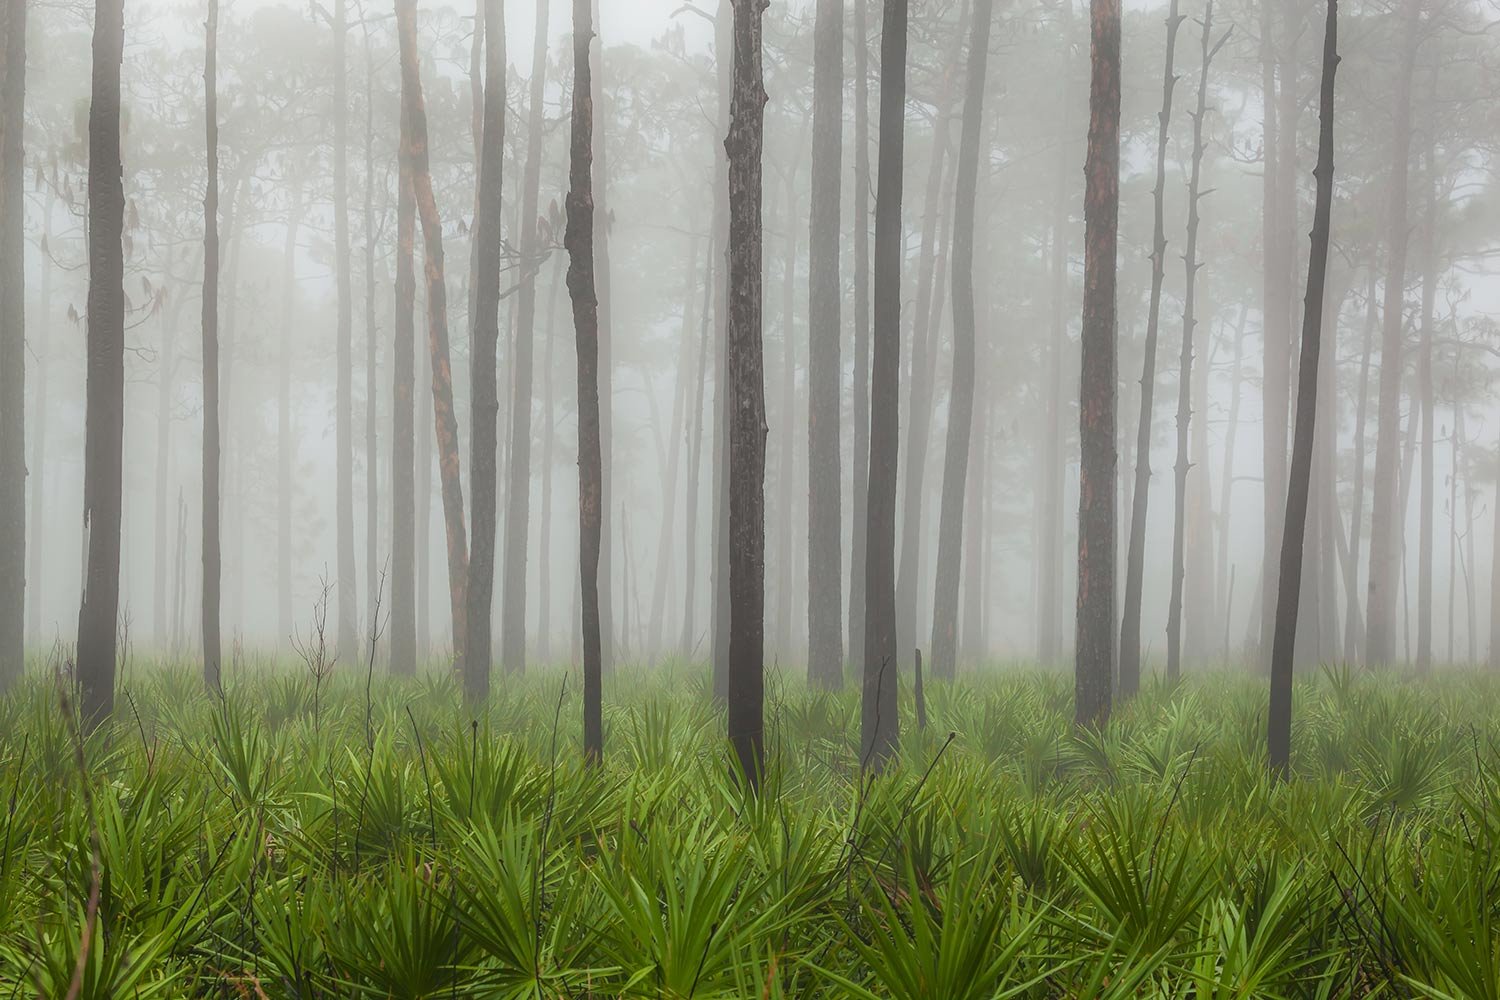  Fog among the palmettos and pines, FL 